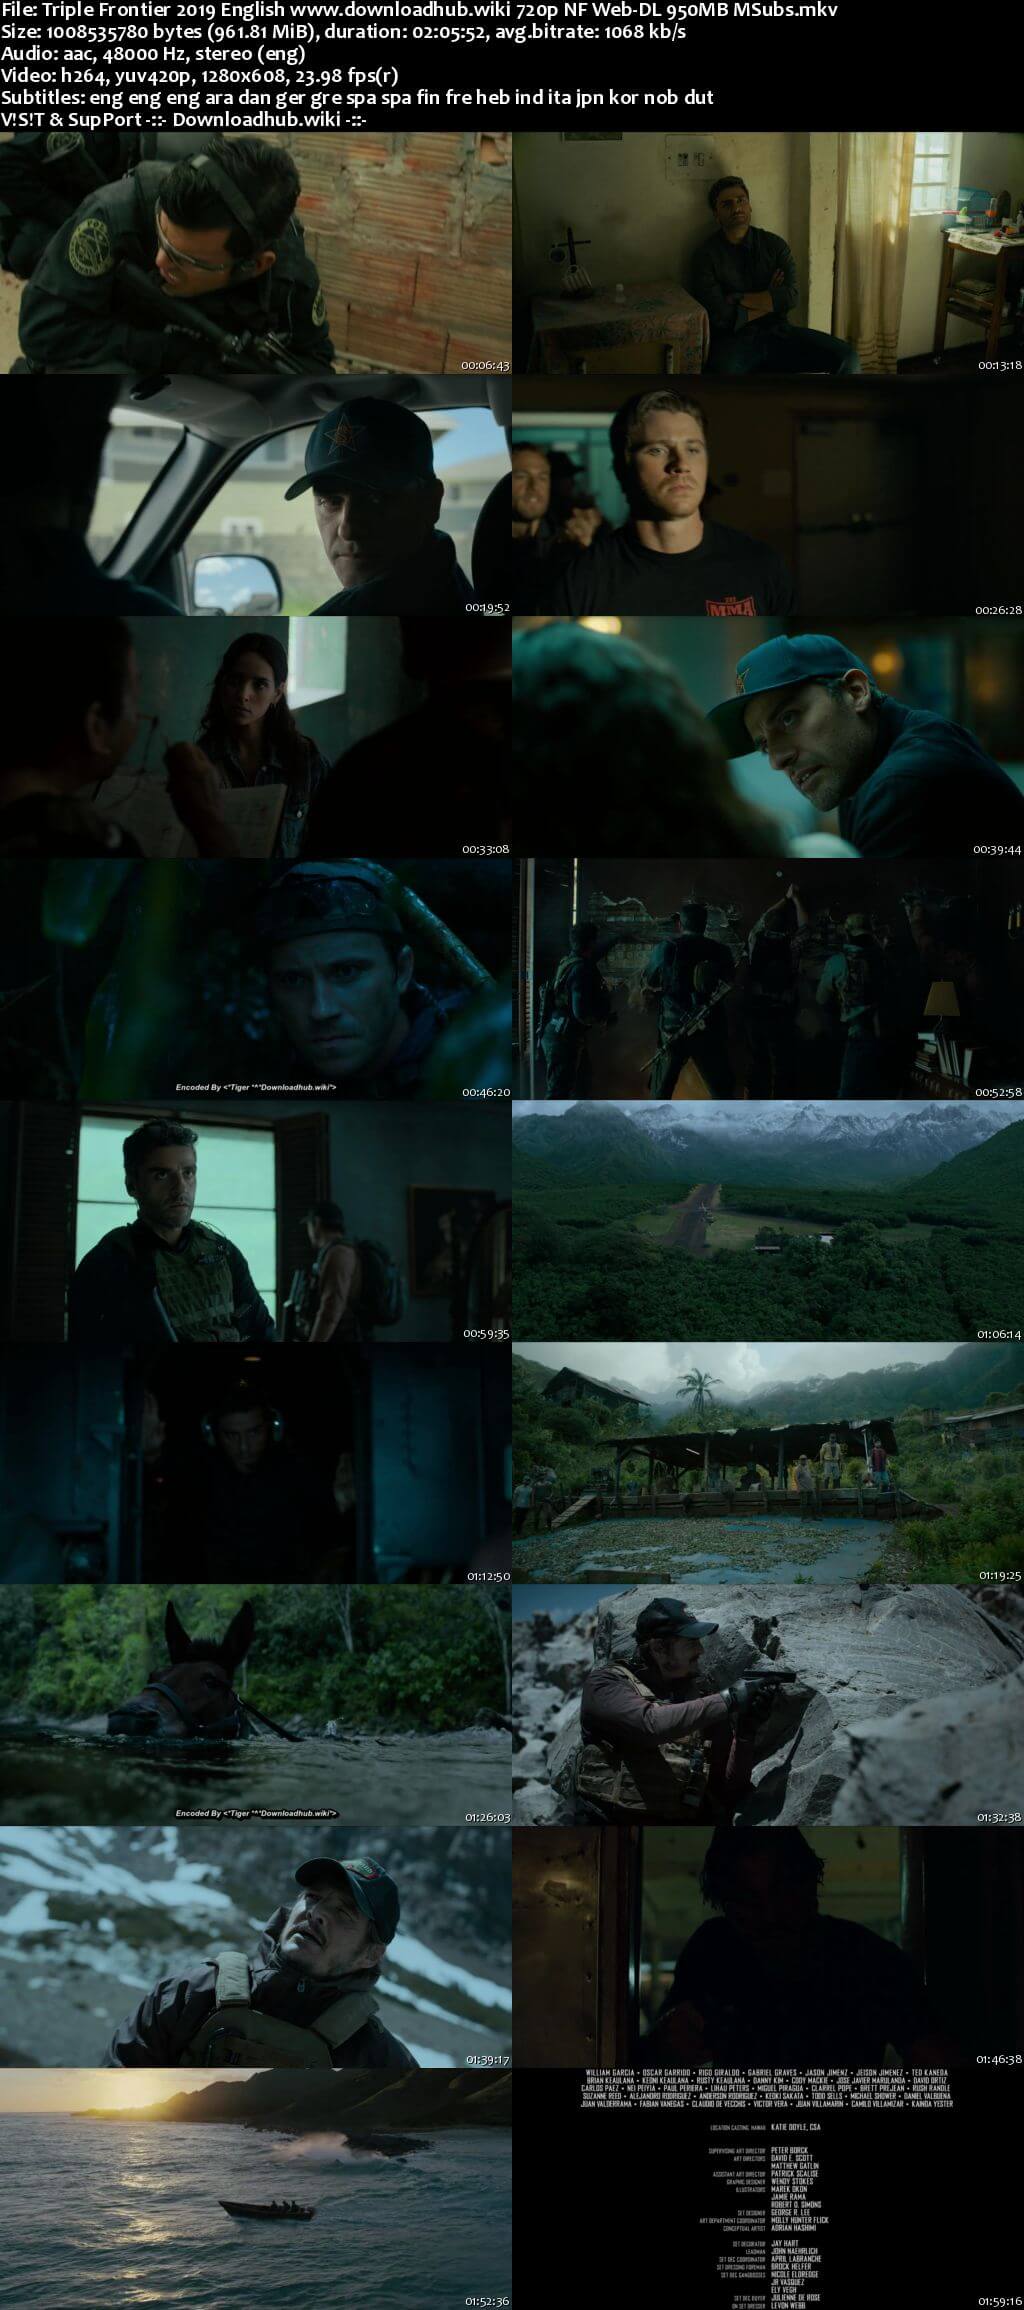 Triple Frontier 2019 English 720p NF Web-DL 950MB MSubs